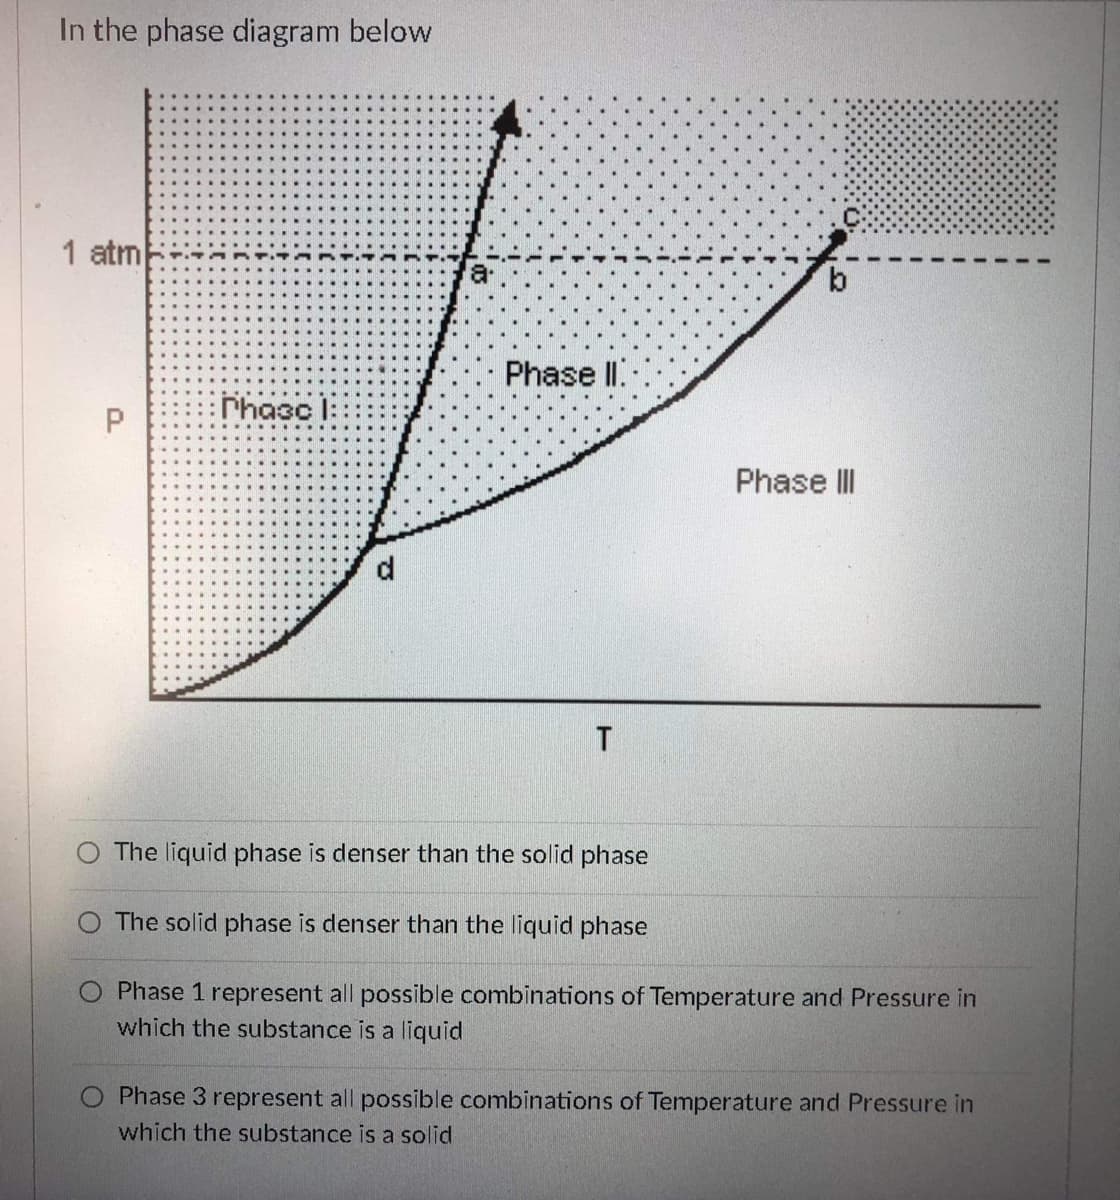 In the phase diagram below
1 atm
Phase II.
P.
Phasc
Phase II
T
The liquid phase is denser than the solid phase
The solid phase is denser than the liquid phase
Phase 1 represent all possible combinations of Temperature and Pressure in
which the substance is a liquid
Phase 3 represent all possible combinations of Temperature and Pressure in
which the substance is a solid
